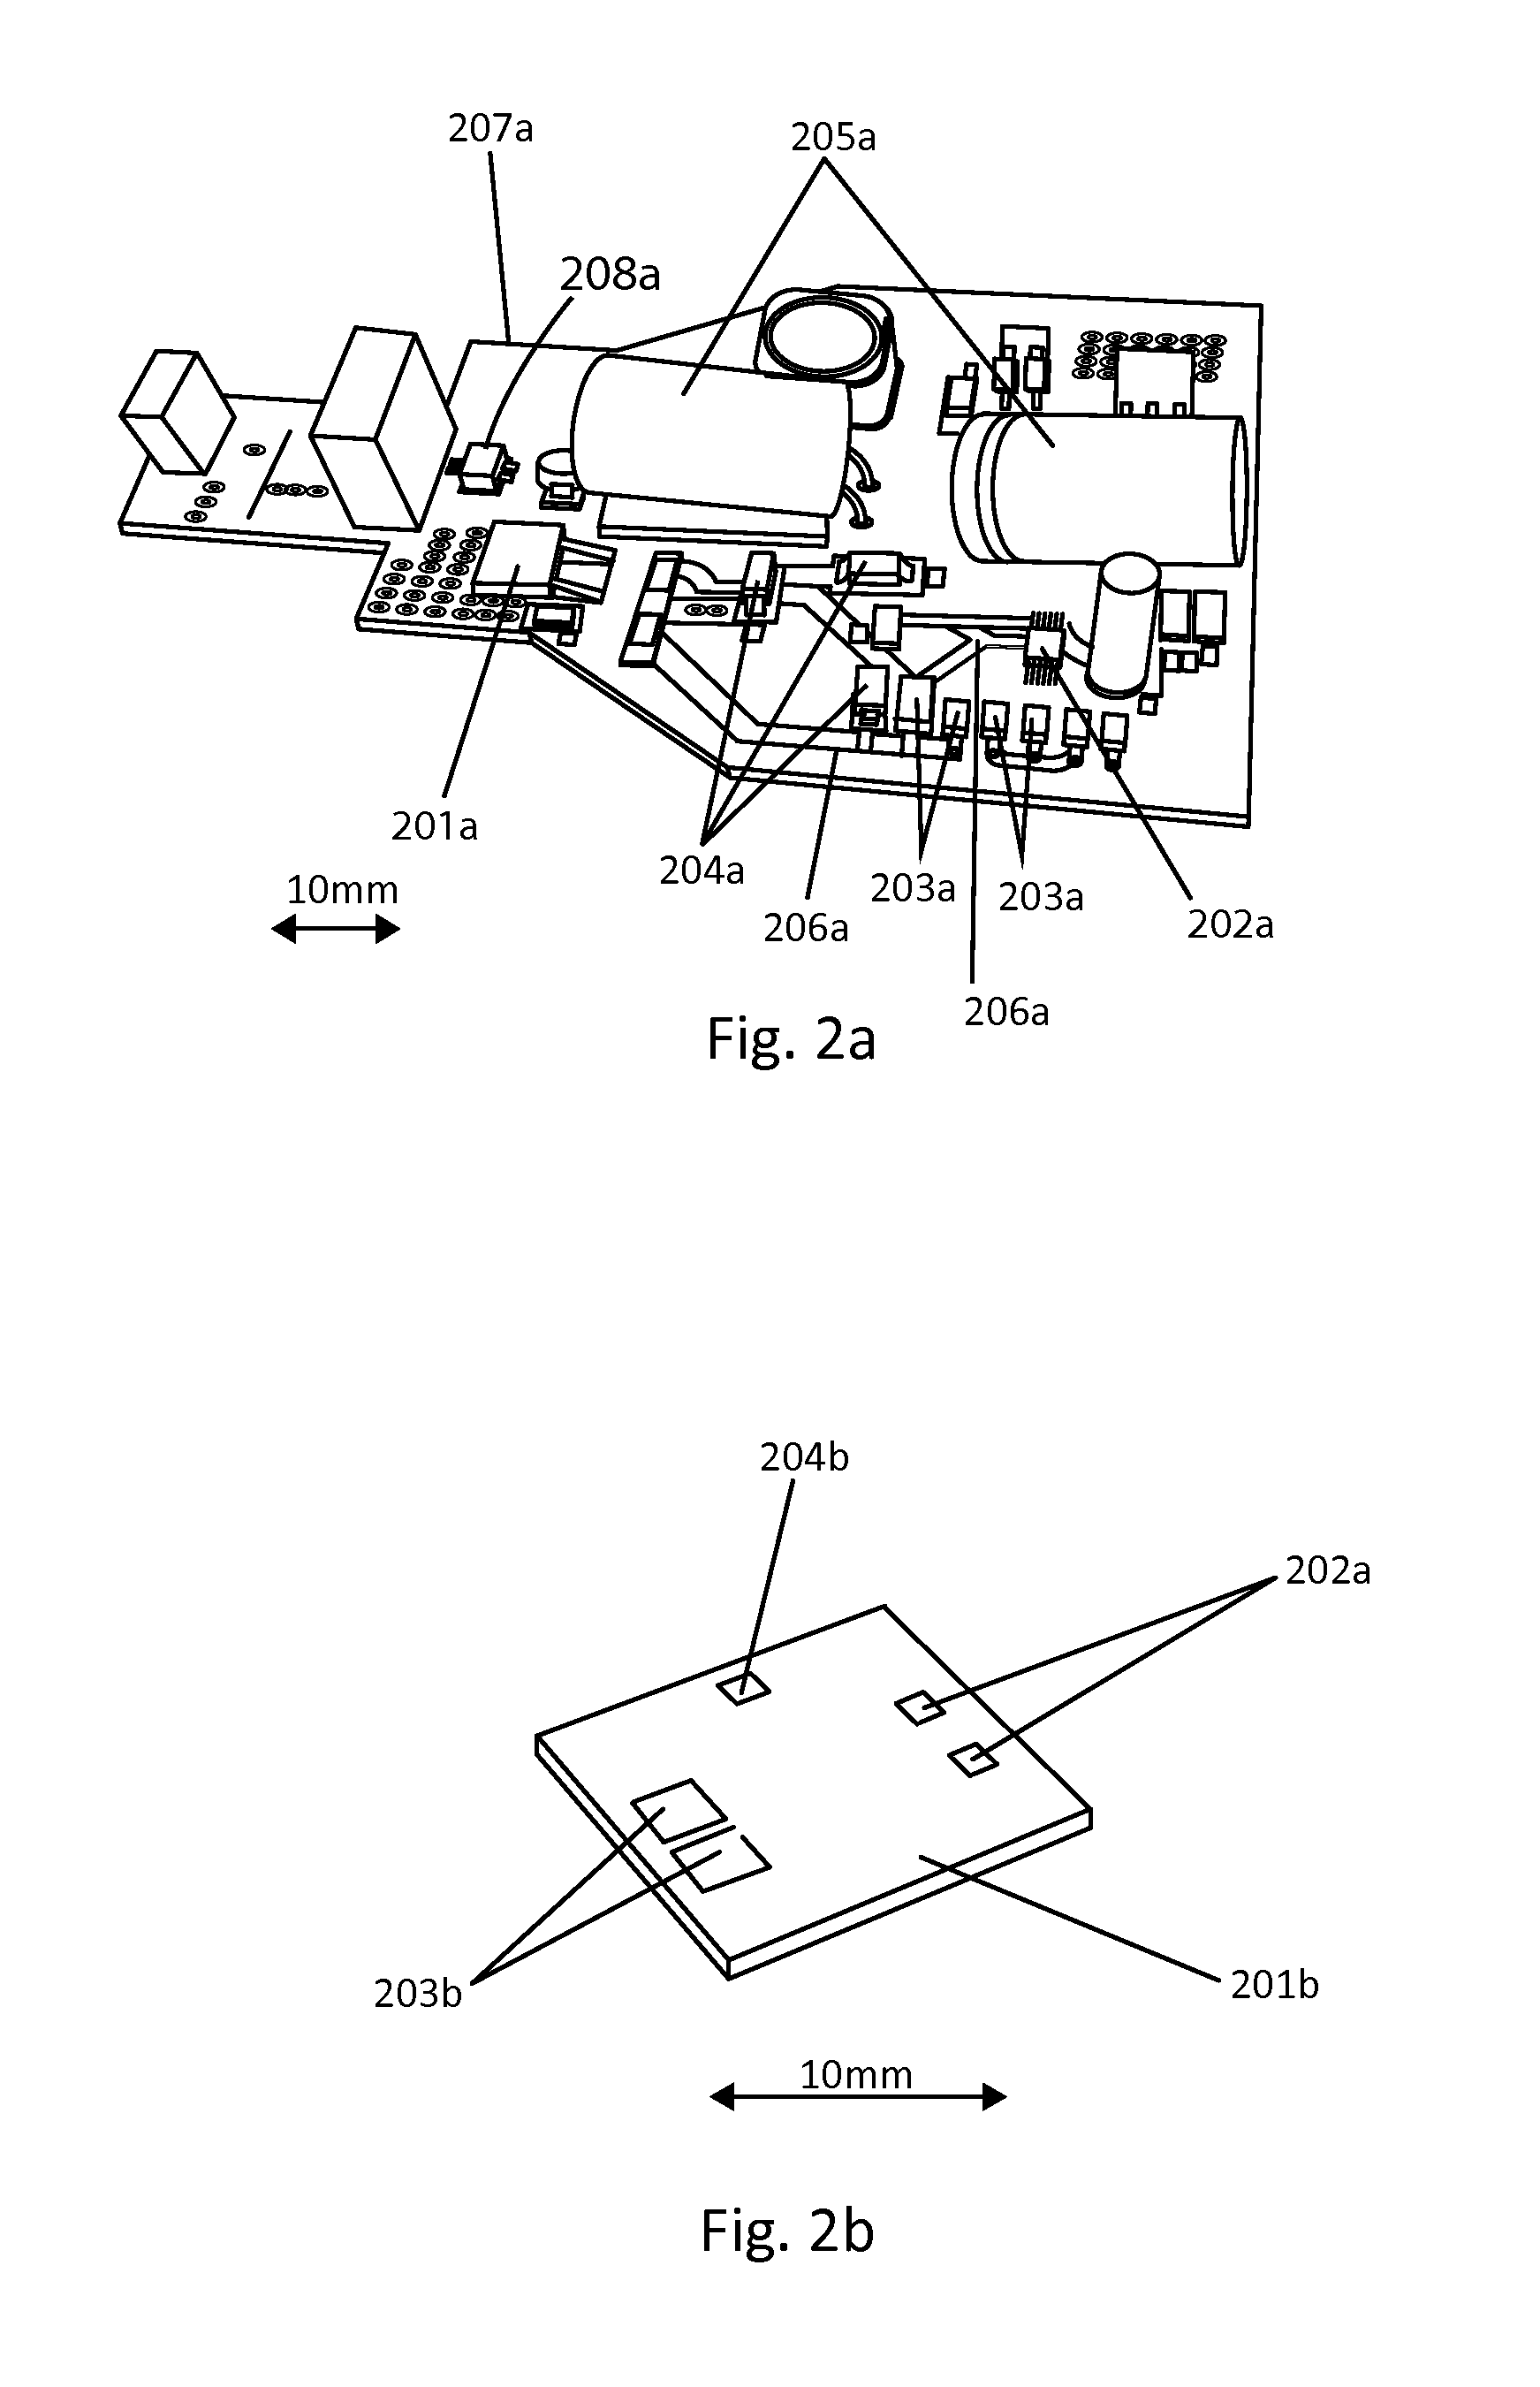 Integrated Electronic Device for Controlling Light Emitting Diodes